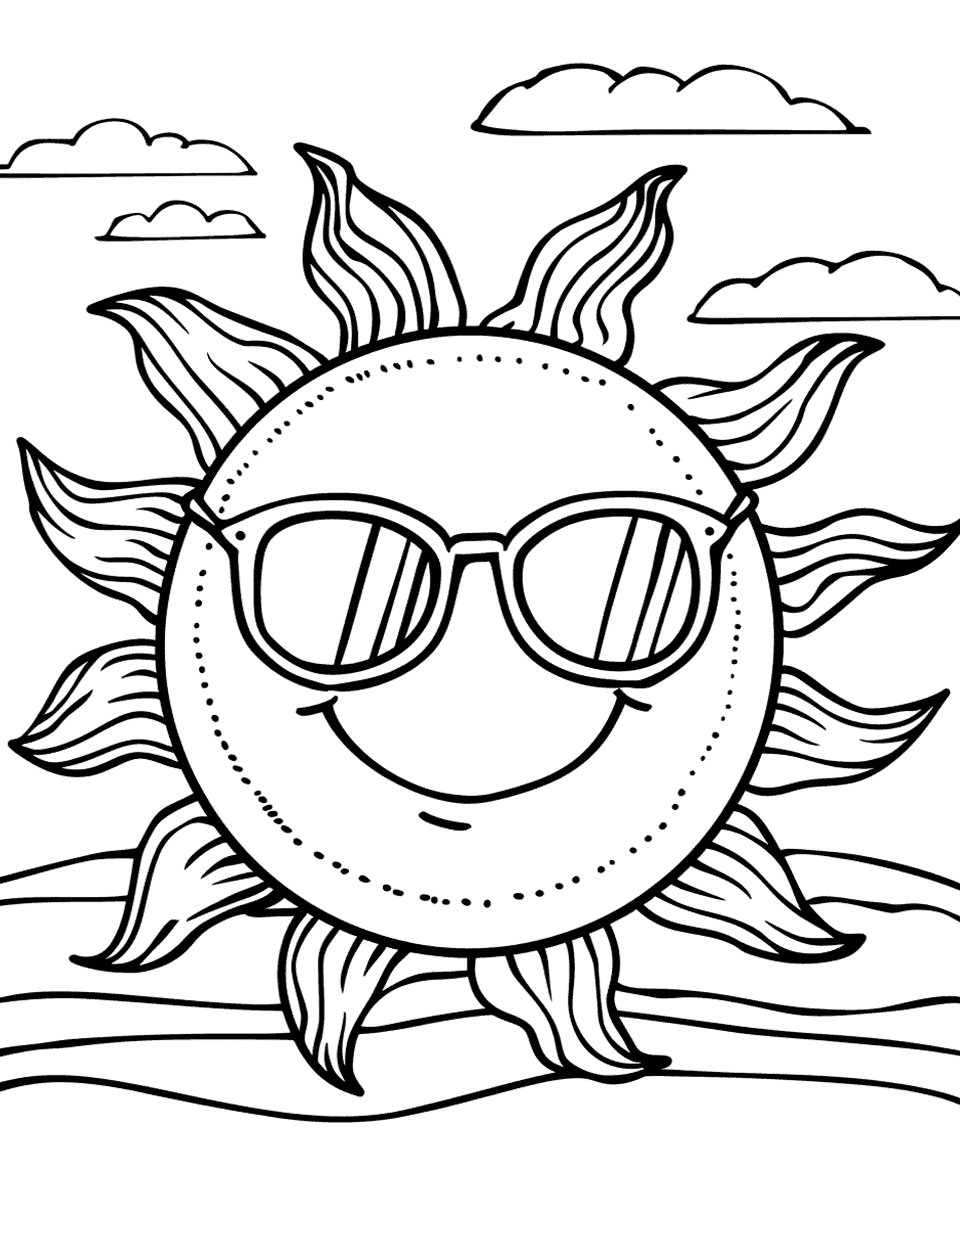 Cute Sun Wearing Sunglasses Coloring Page - A cute sun wearing sunglasses and smiling brightly.